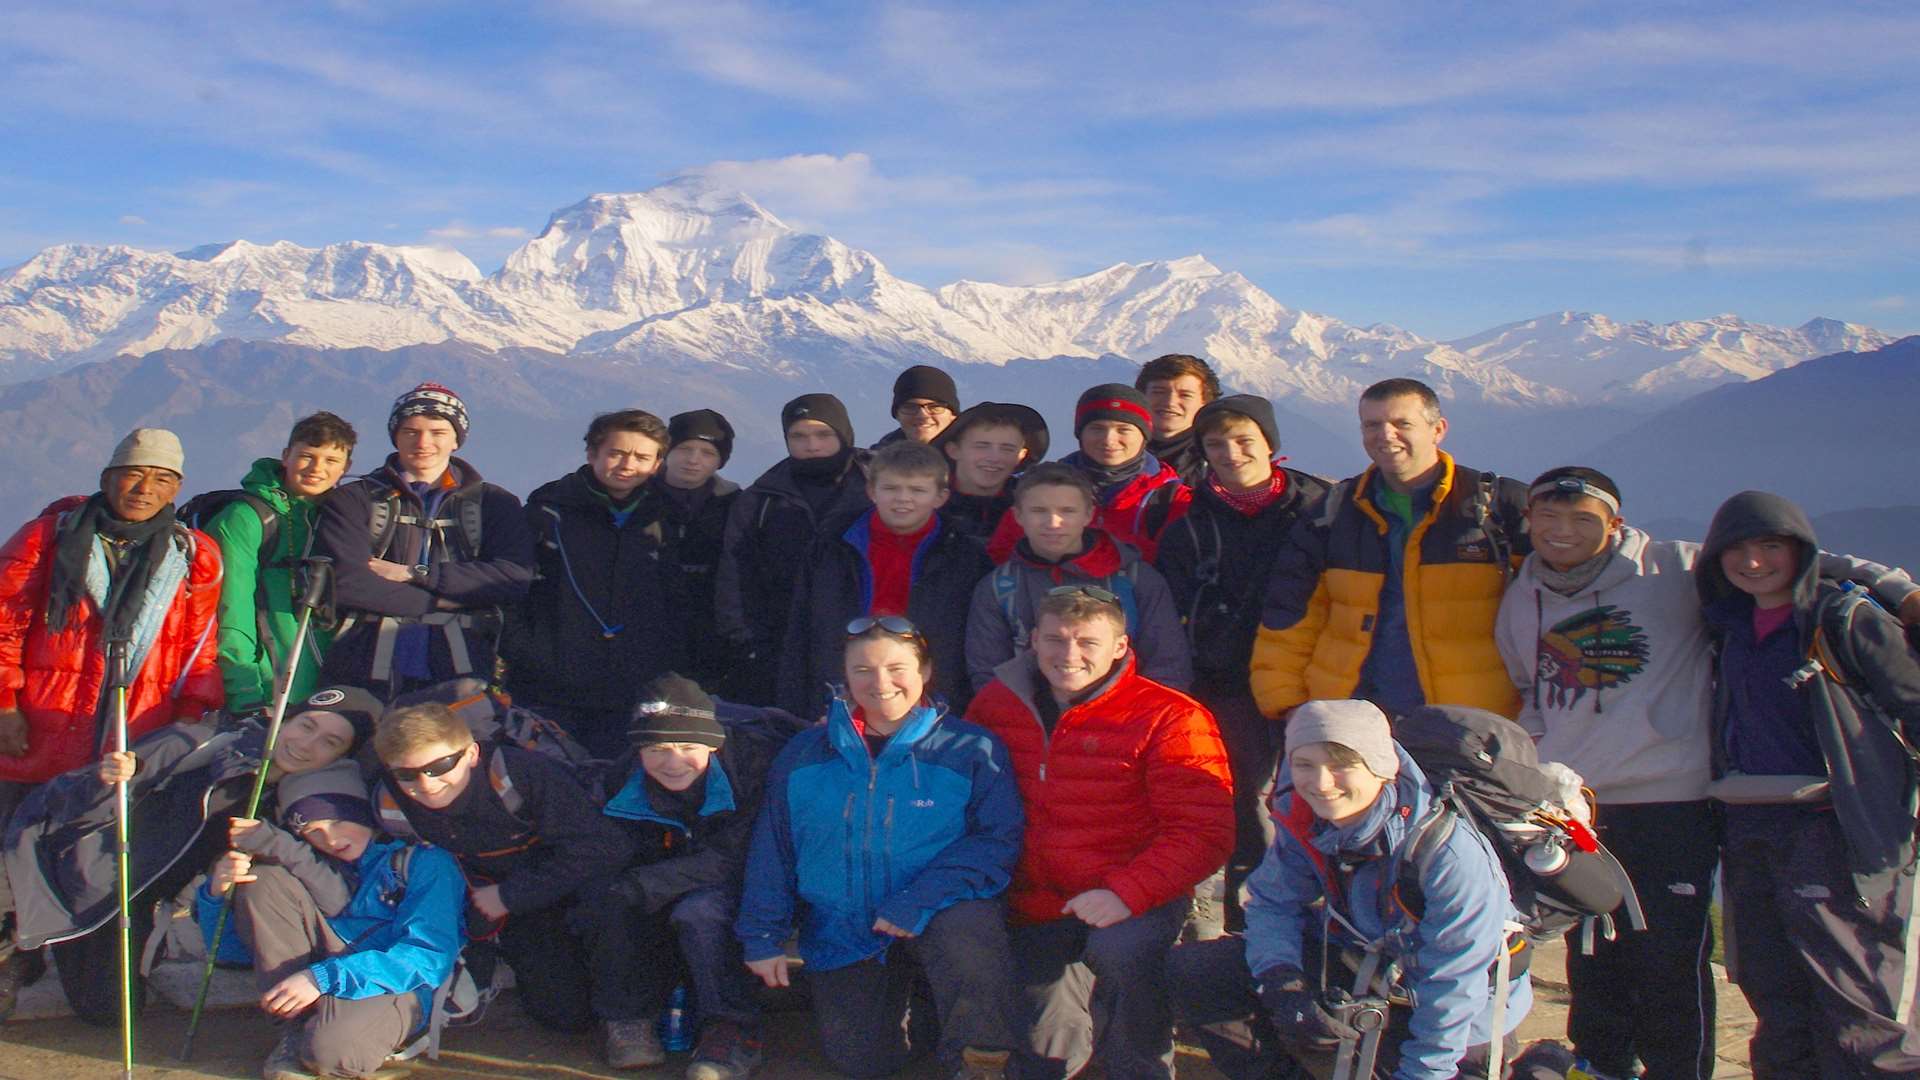 The boys trekked to Poon Hill in Nepal. Picture: Rachel Lovera